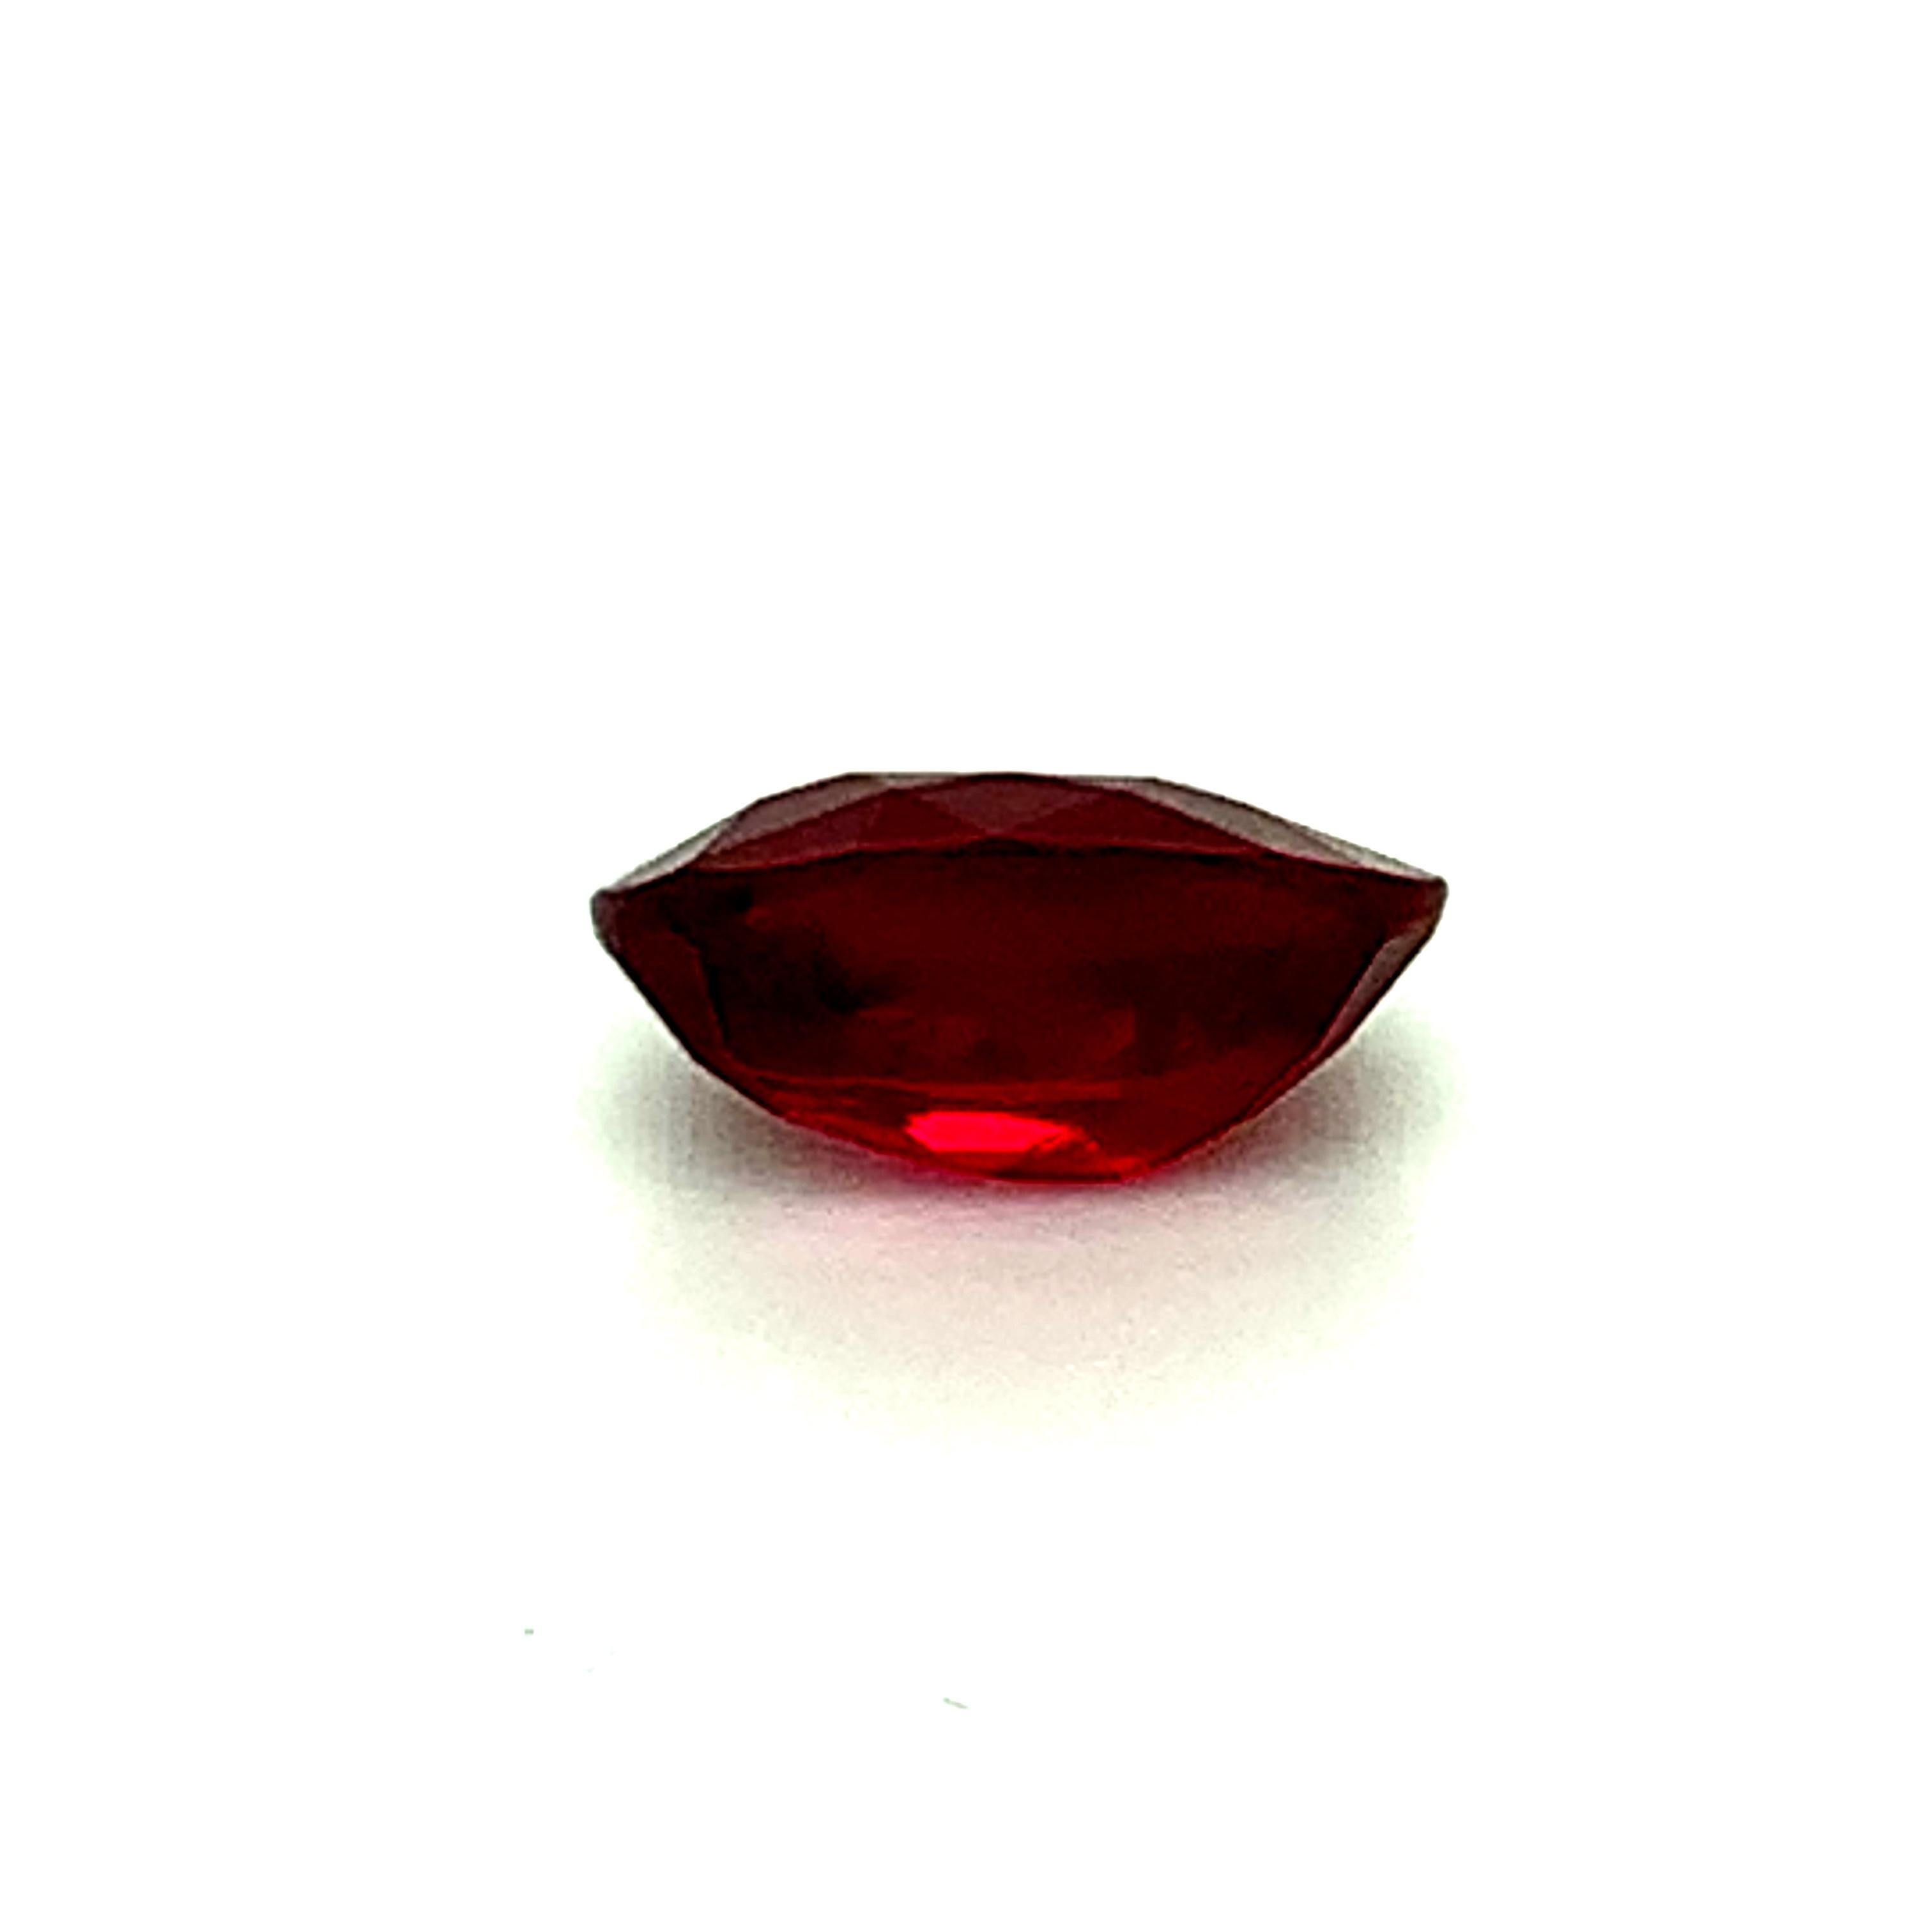 Oval Cut Unheated 3.05 Carat “Pigeon’s Blood” Ruby, Unset Loose Gemstone, GIA Certified